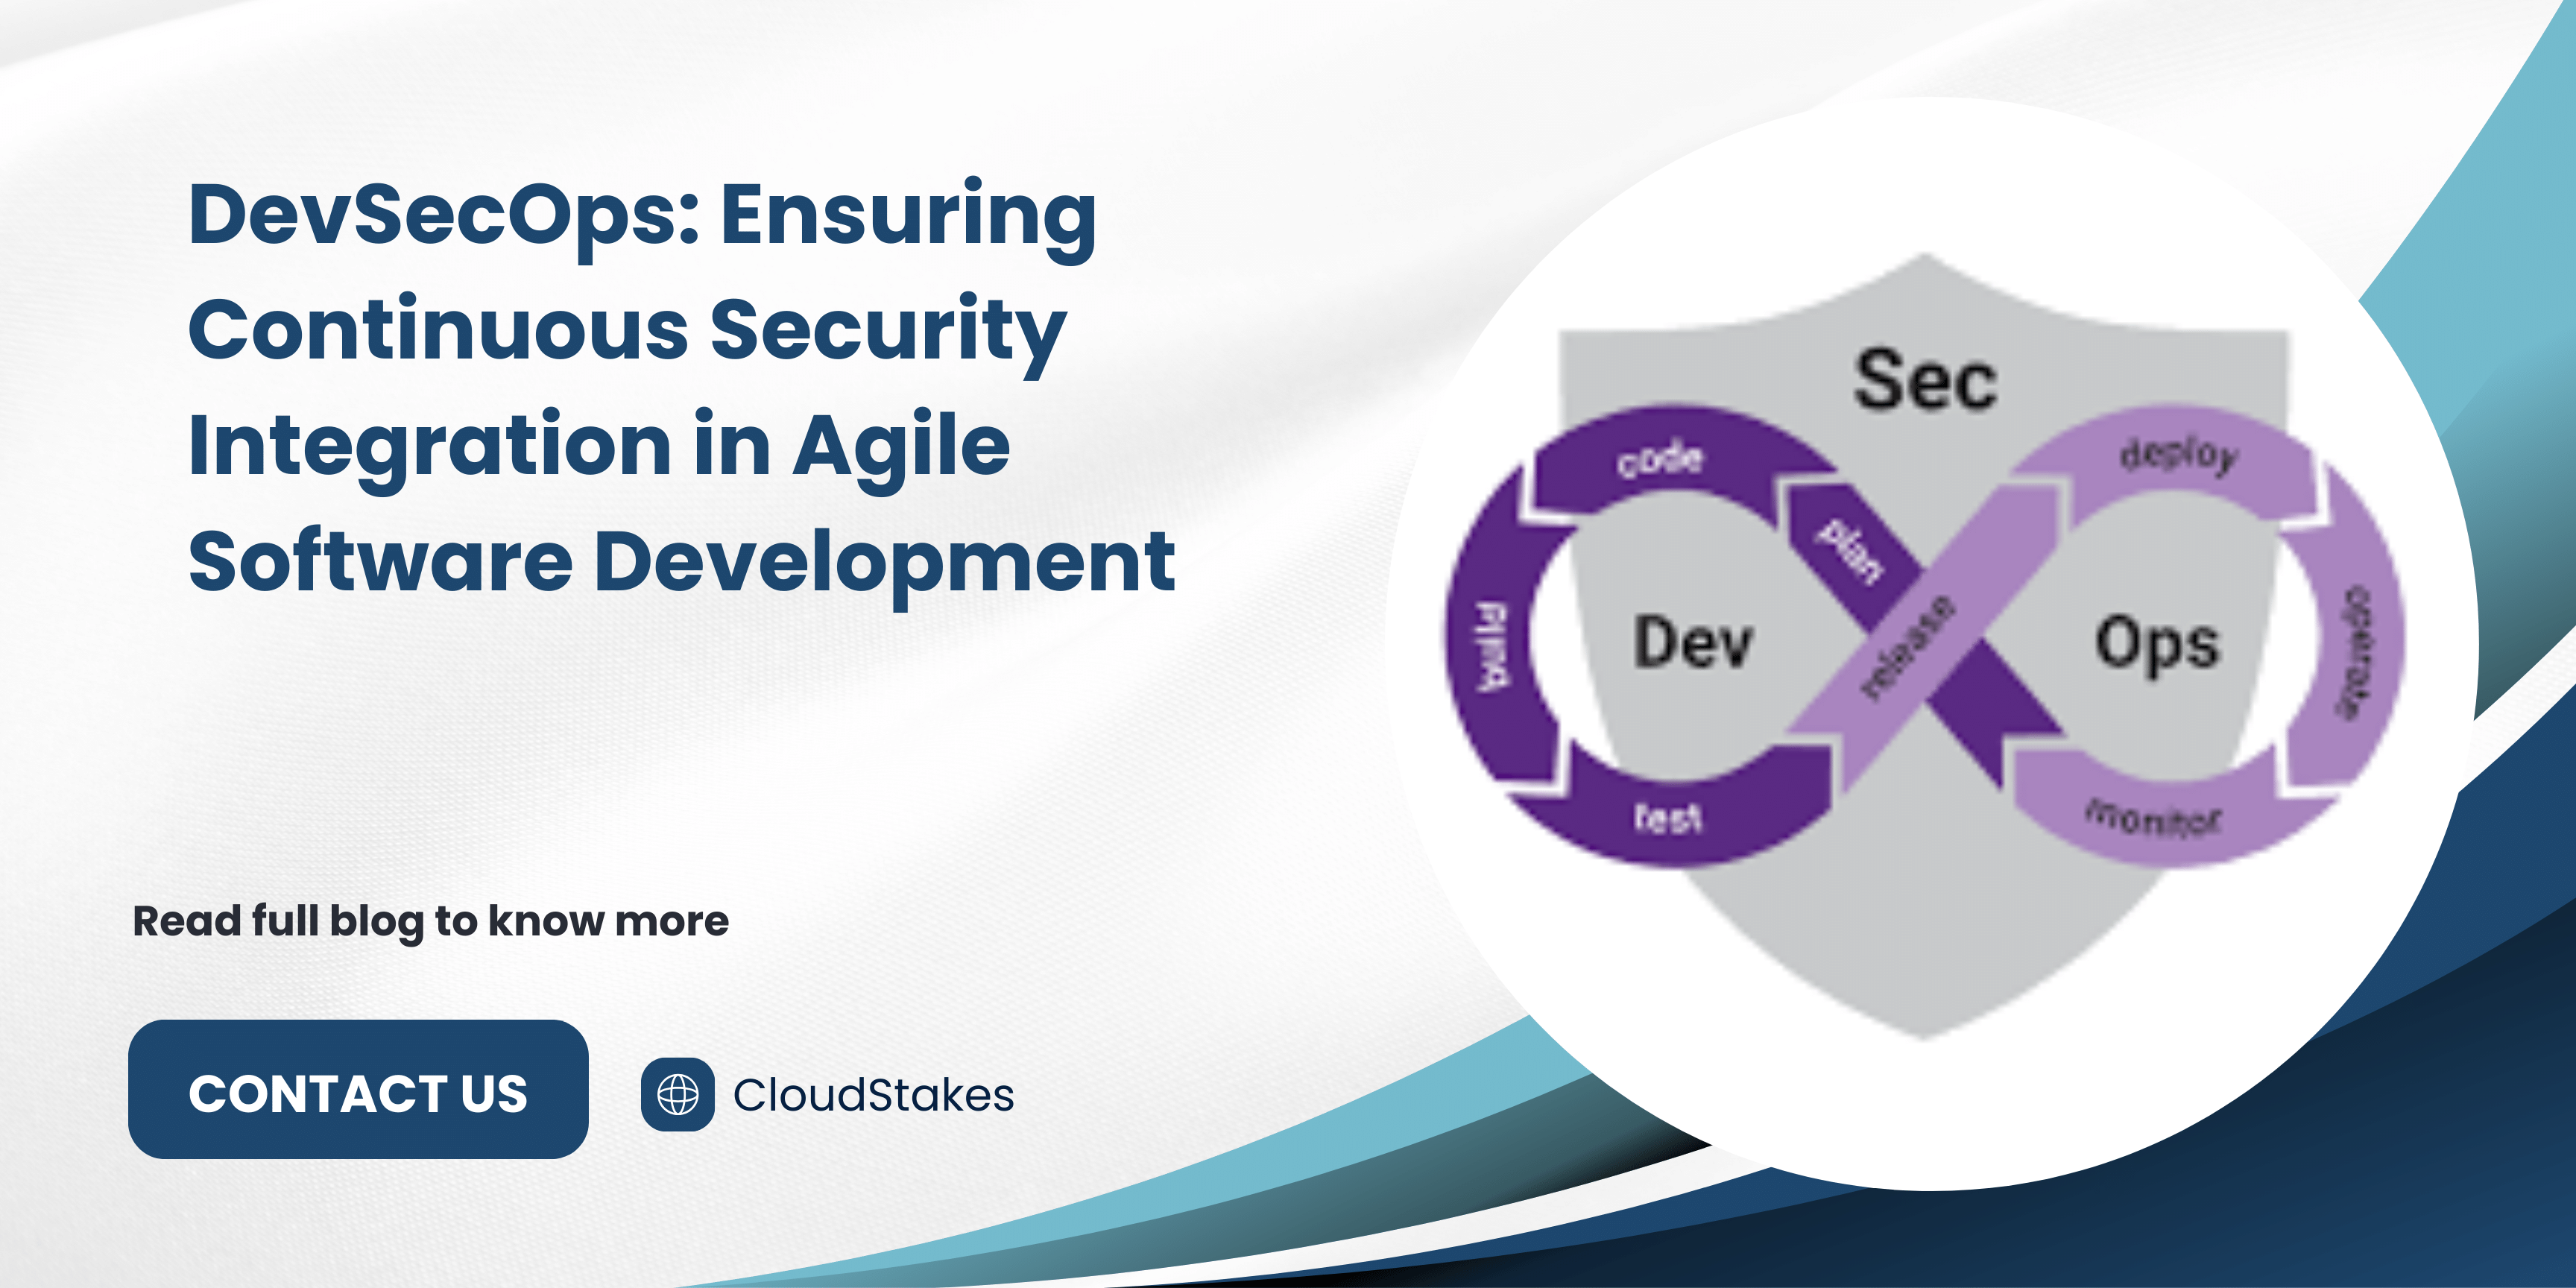 DevSecOps: Ensuring Continuous Security Integration in Agile Software Development